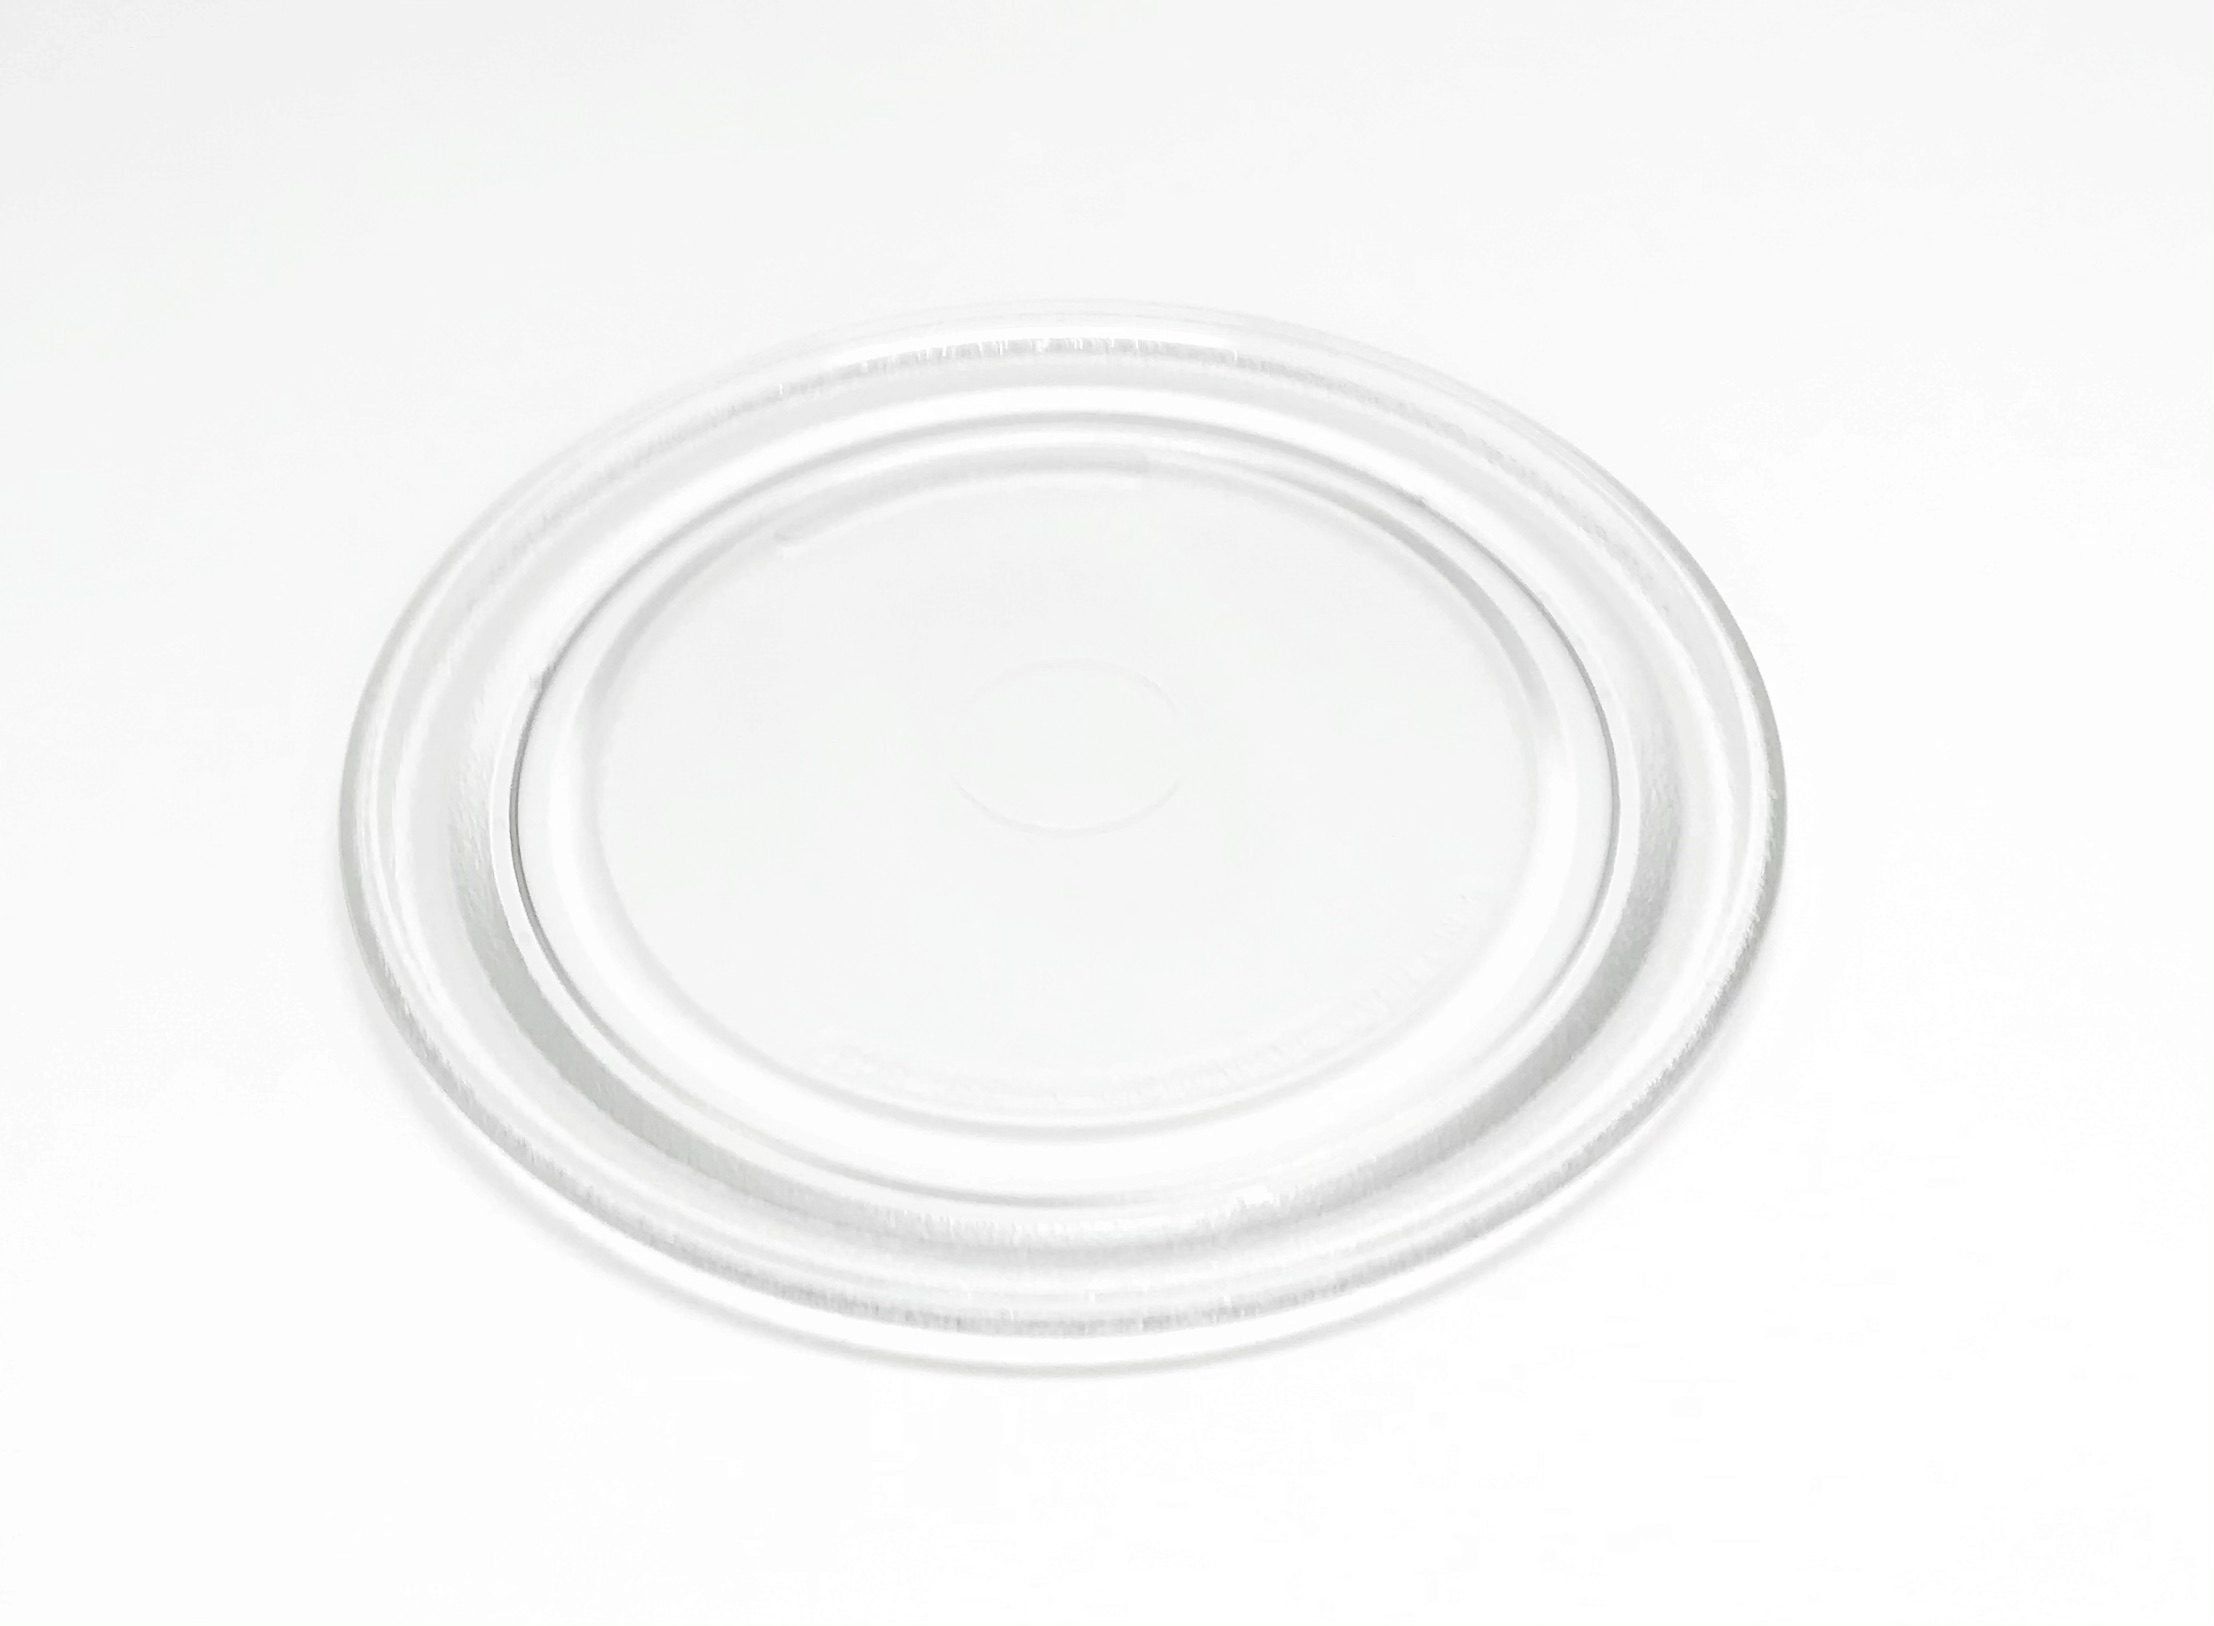 Sharp OEM Sharp Microwave Turntable Glass Tray Plate Shipped With R216FS, R-216FS